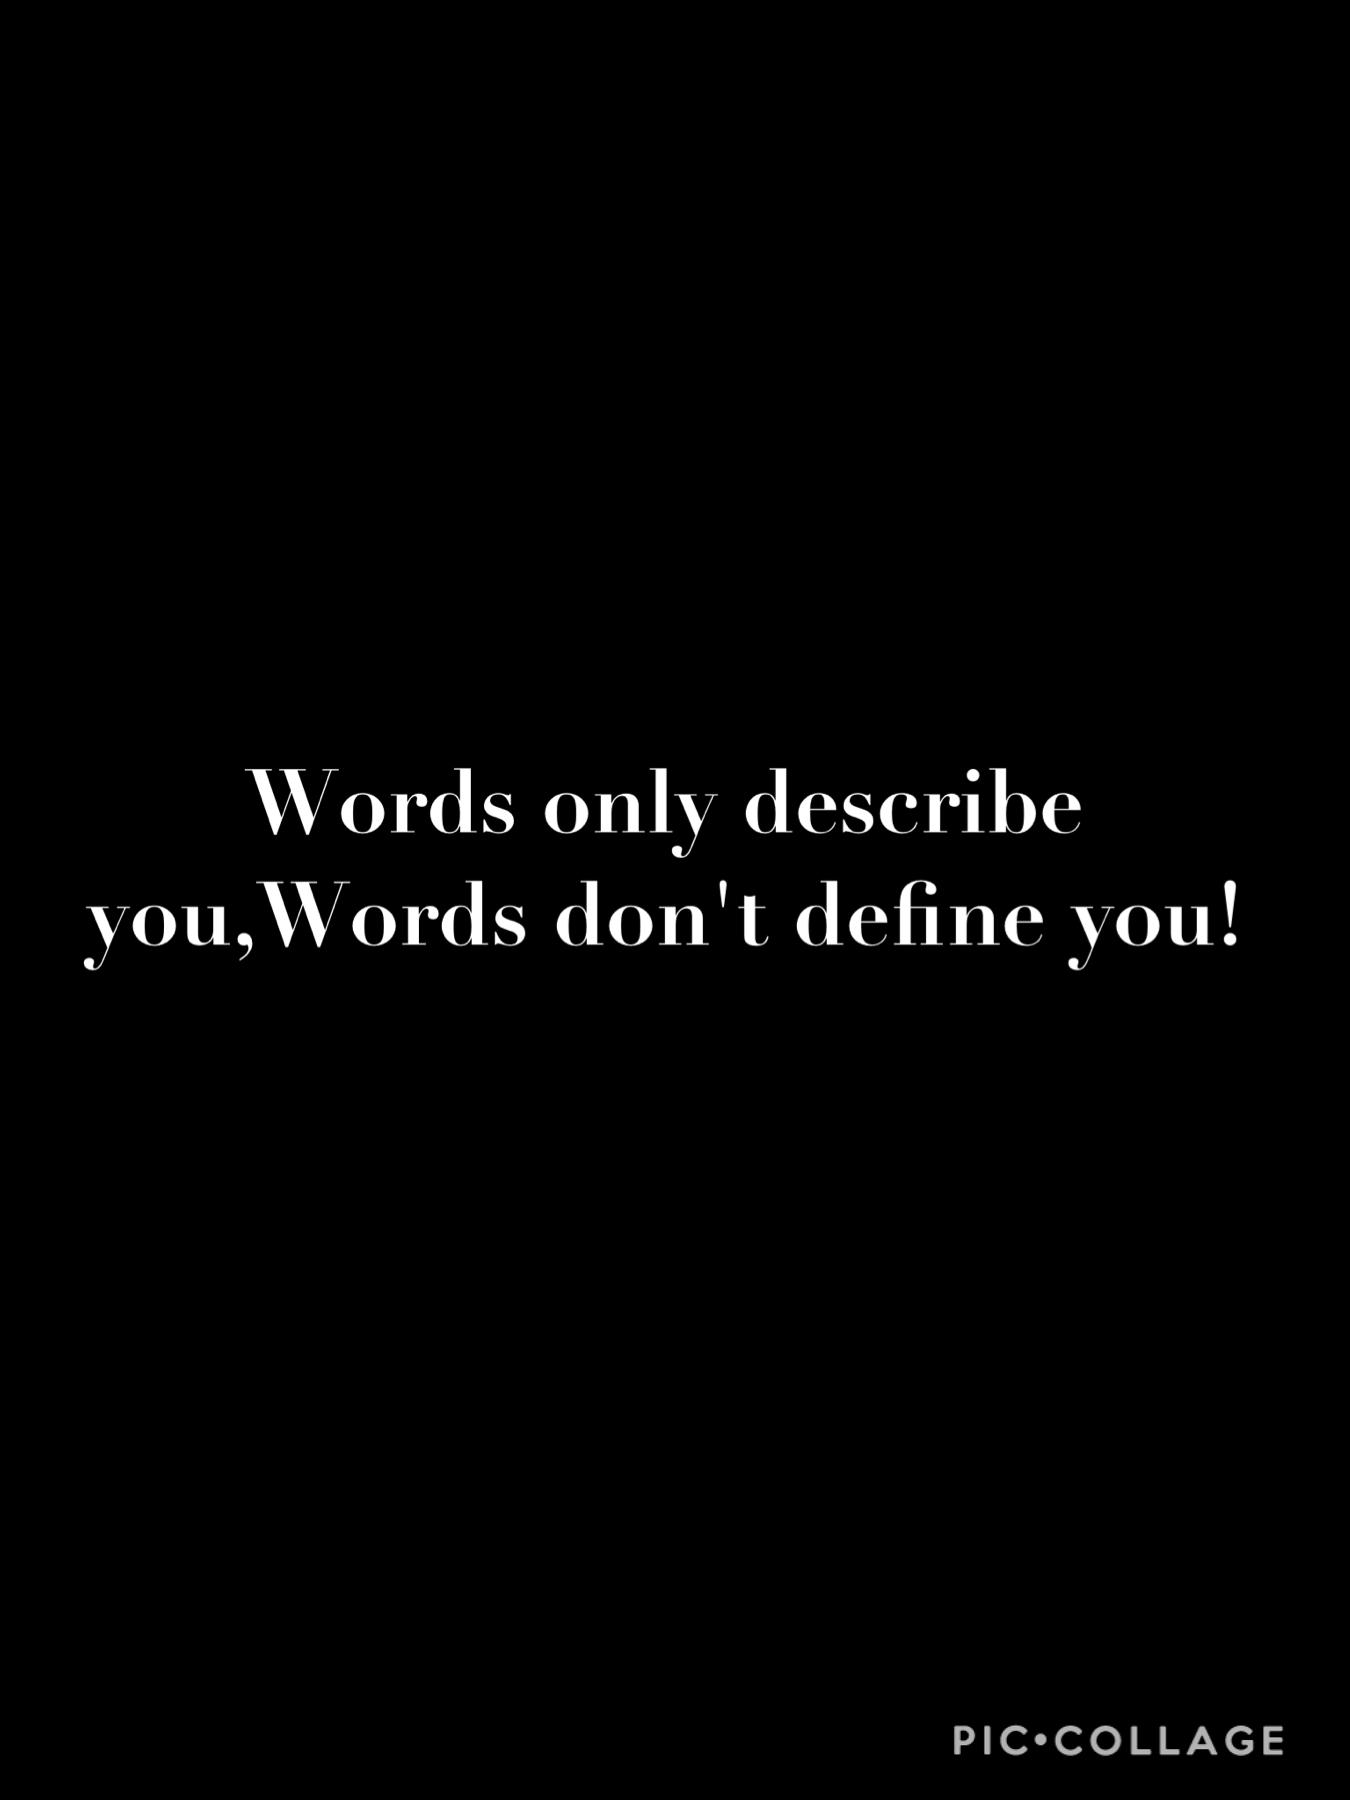 Don’t get hurt when people call you bad words that have nothing to do with you!
05/01/21